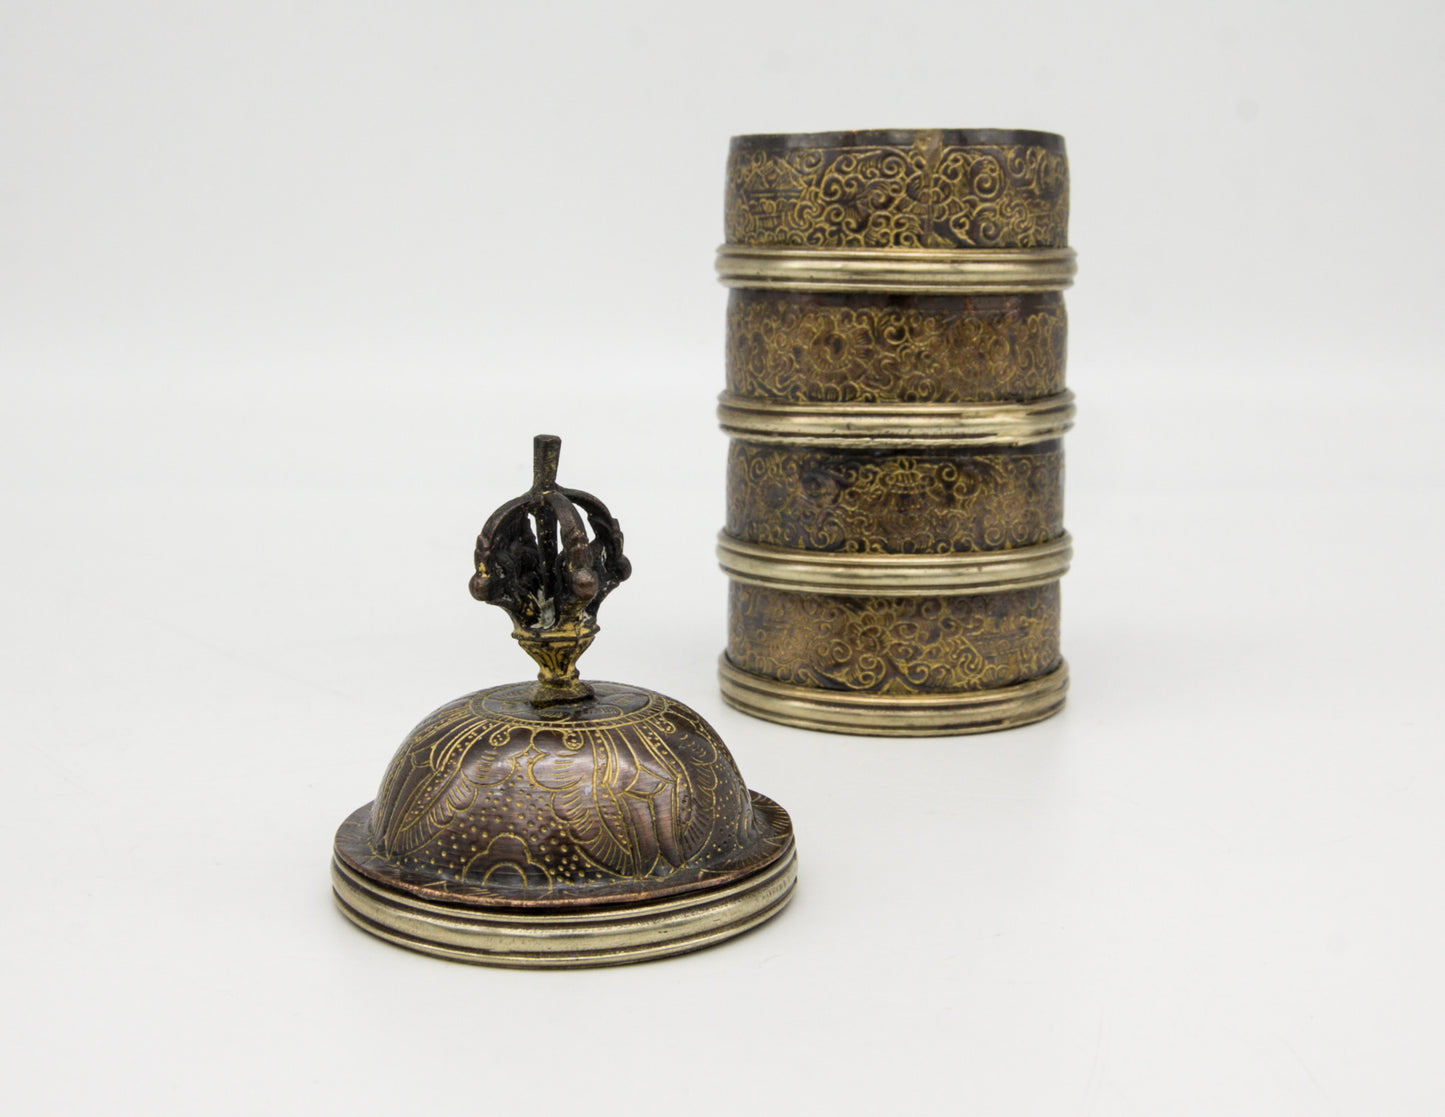 Oxidised Copper Stacked Rice Container